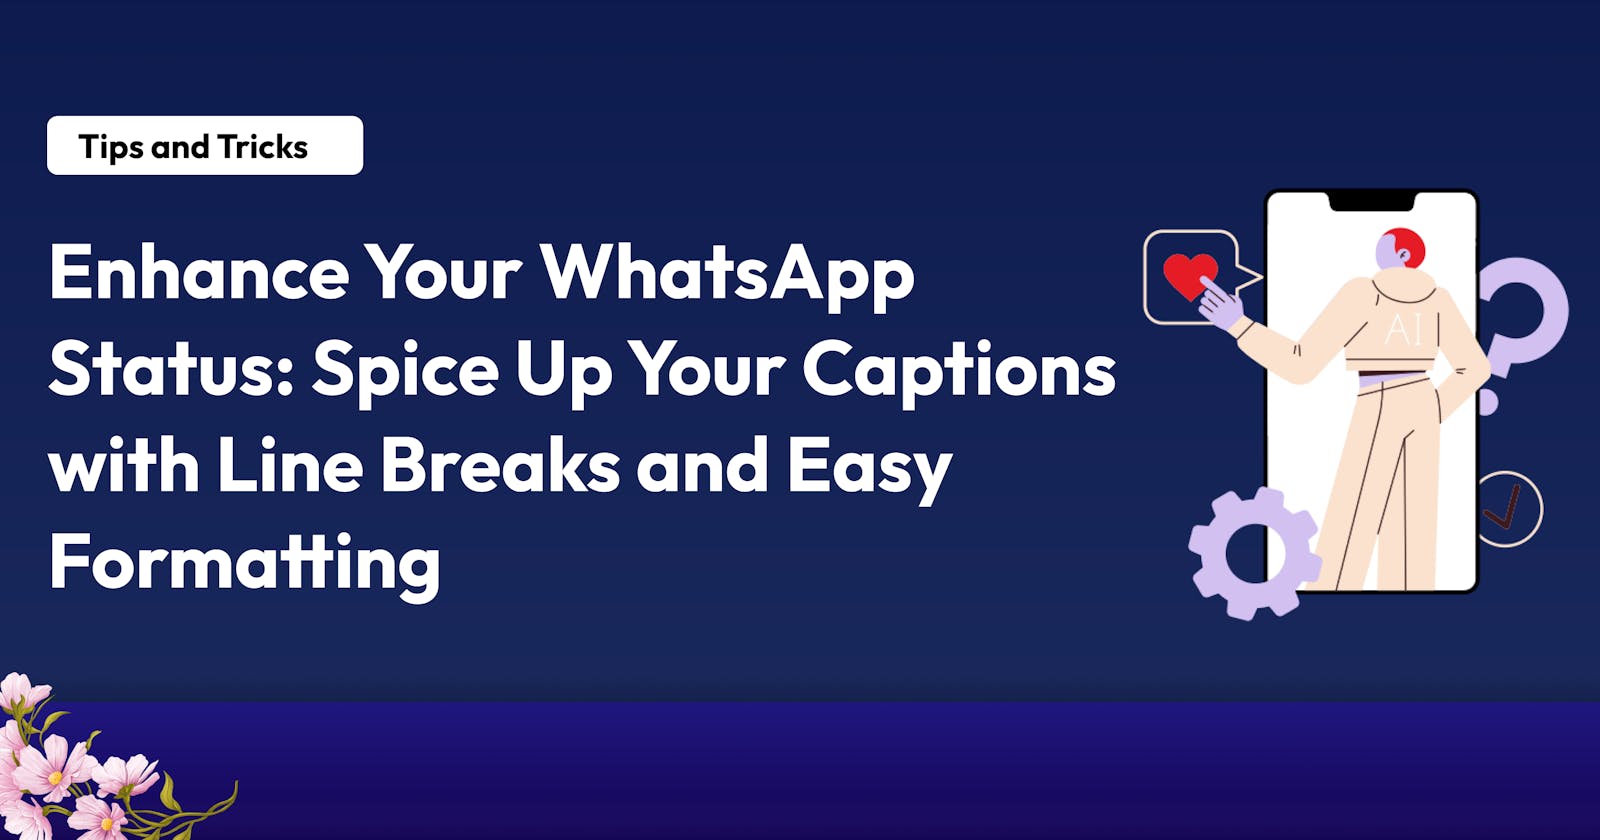 Enhance Your WhatsApp Status: Spice Up Your Captions with Line Breaks and Easy Formatting